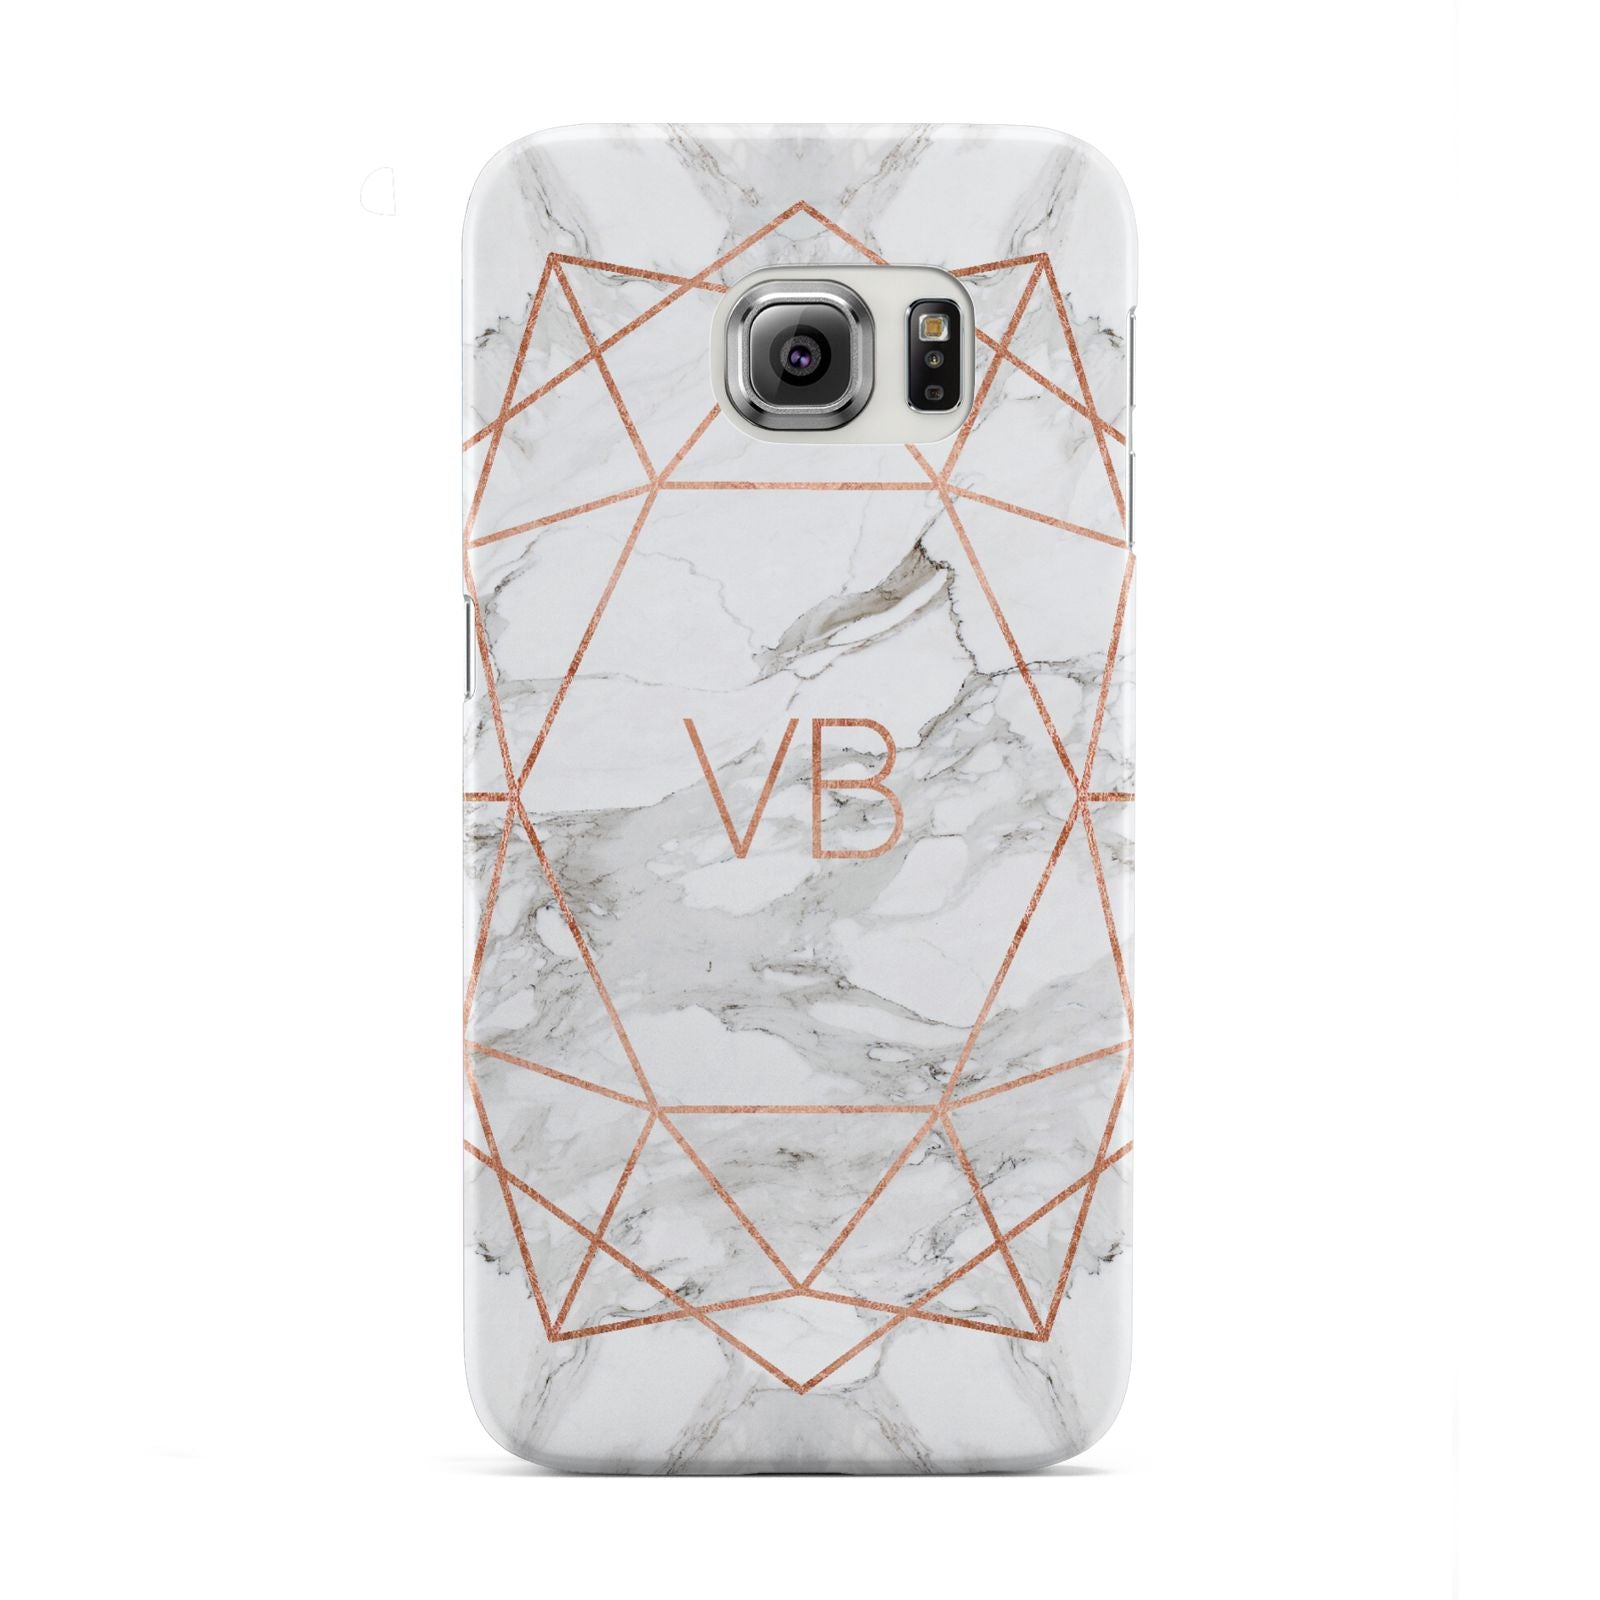 Personalised Rose Gold Marble Initials Samsung Galaxy S6 Edge Case